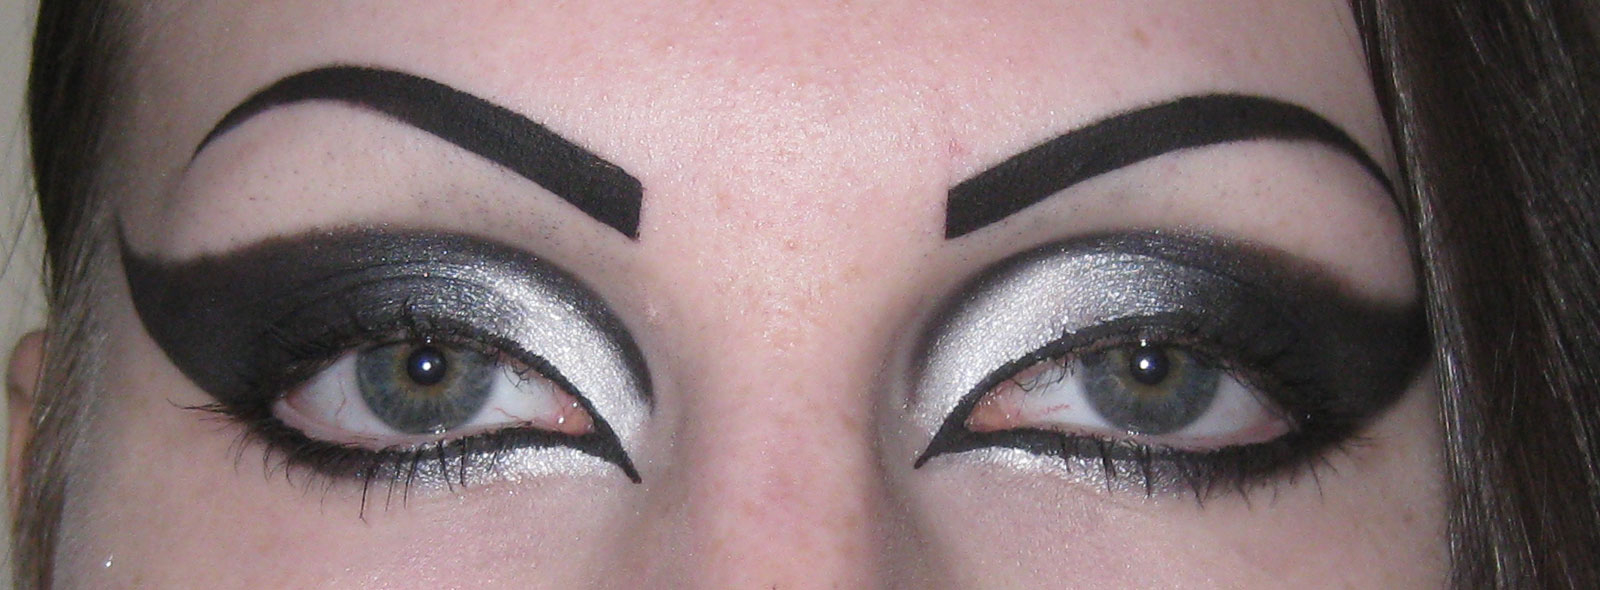 Gothic Eye Makeup Dramatic Gothic White To Black Extended Winged Cat Eye Makeup